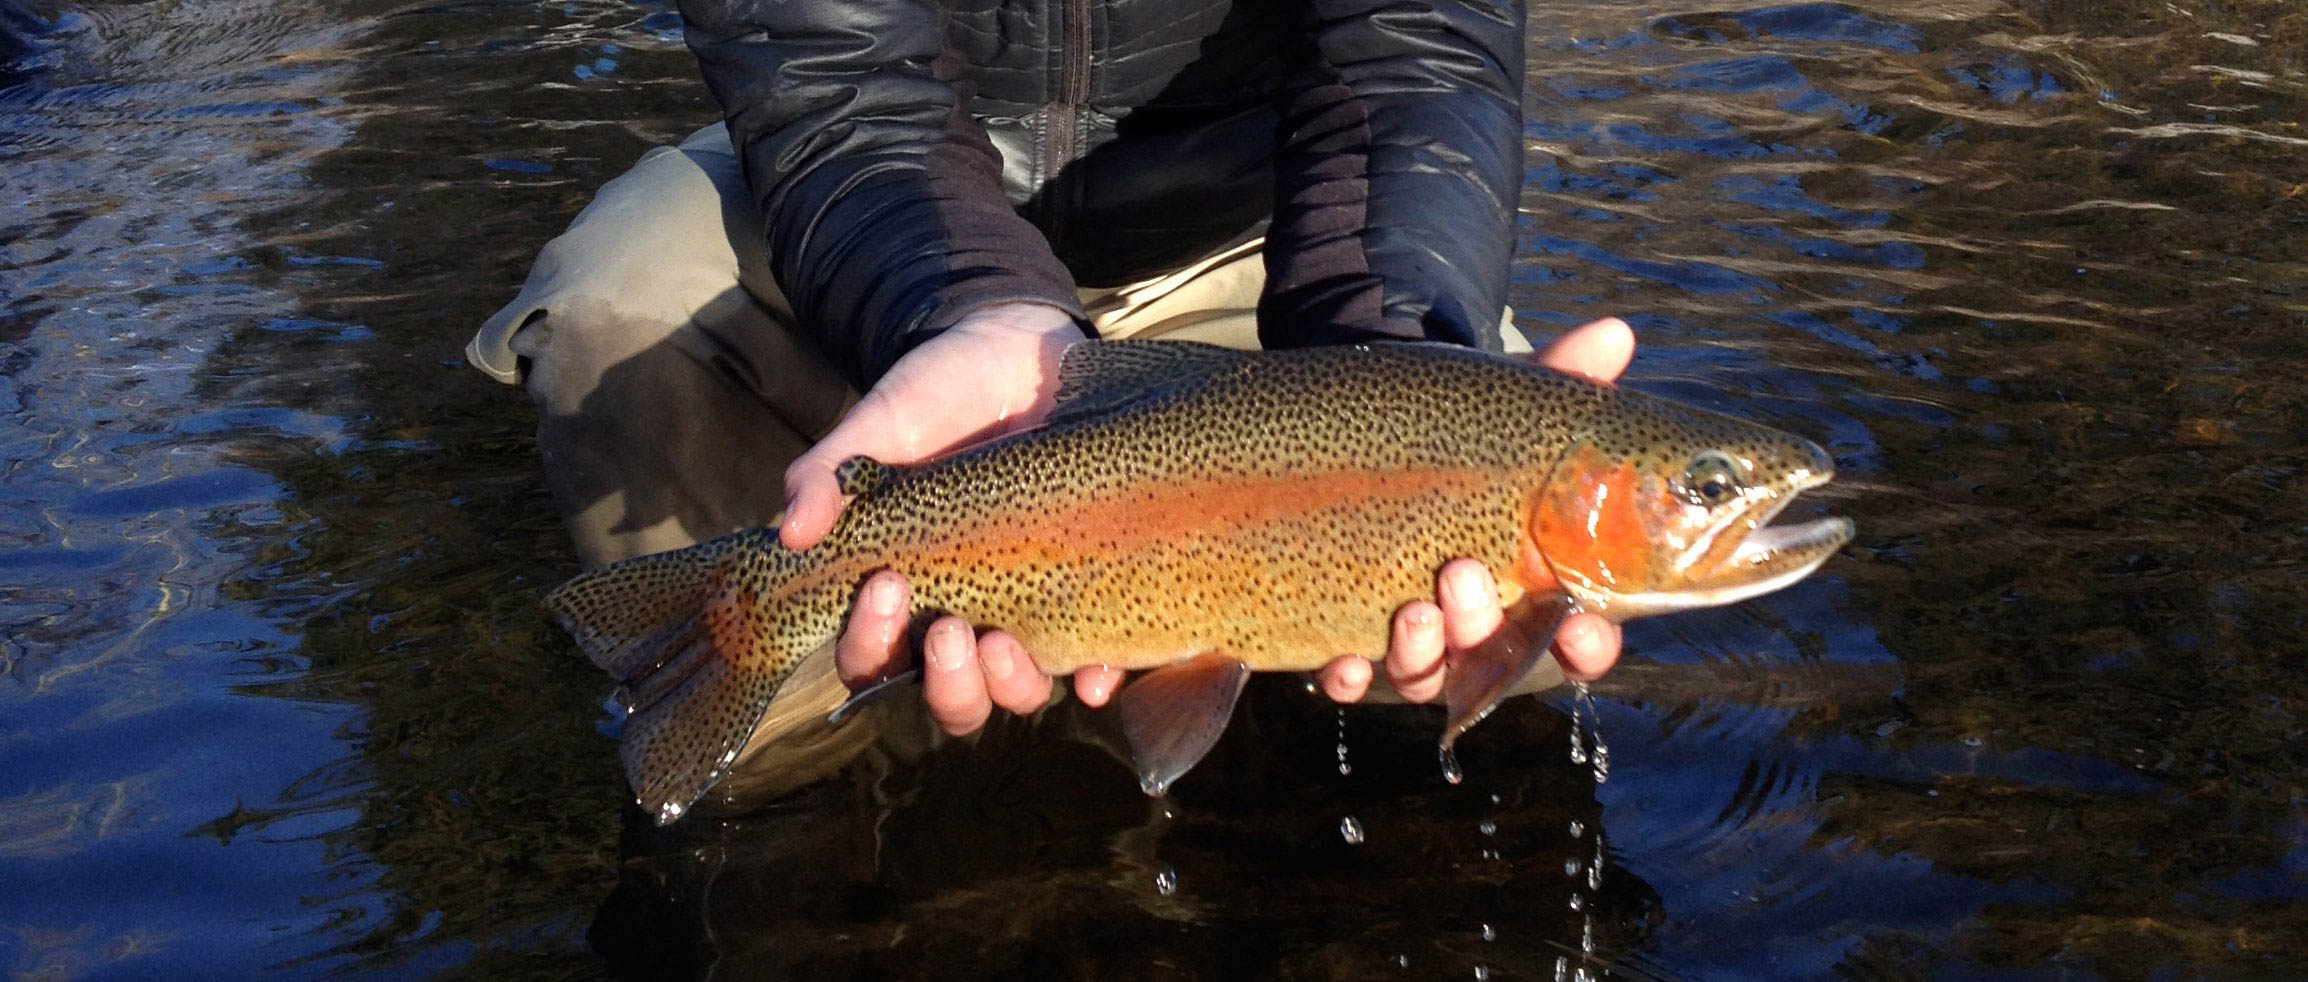 Vail Valley Fly Fishing Adventures | Sage Outdoor Adventures